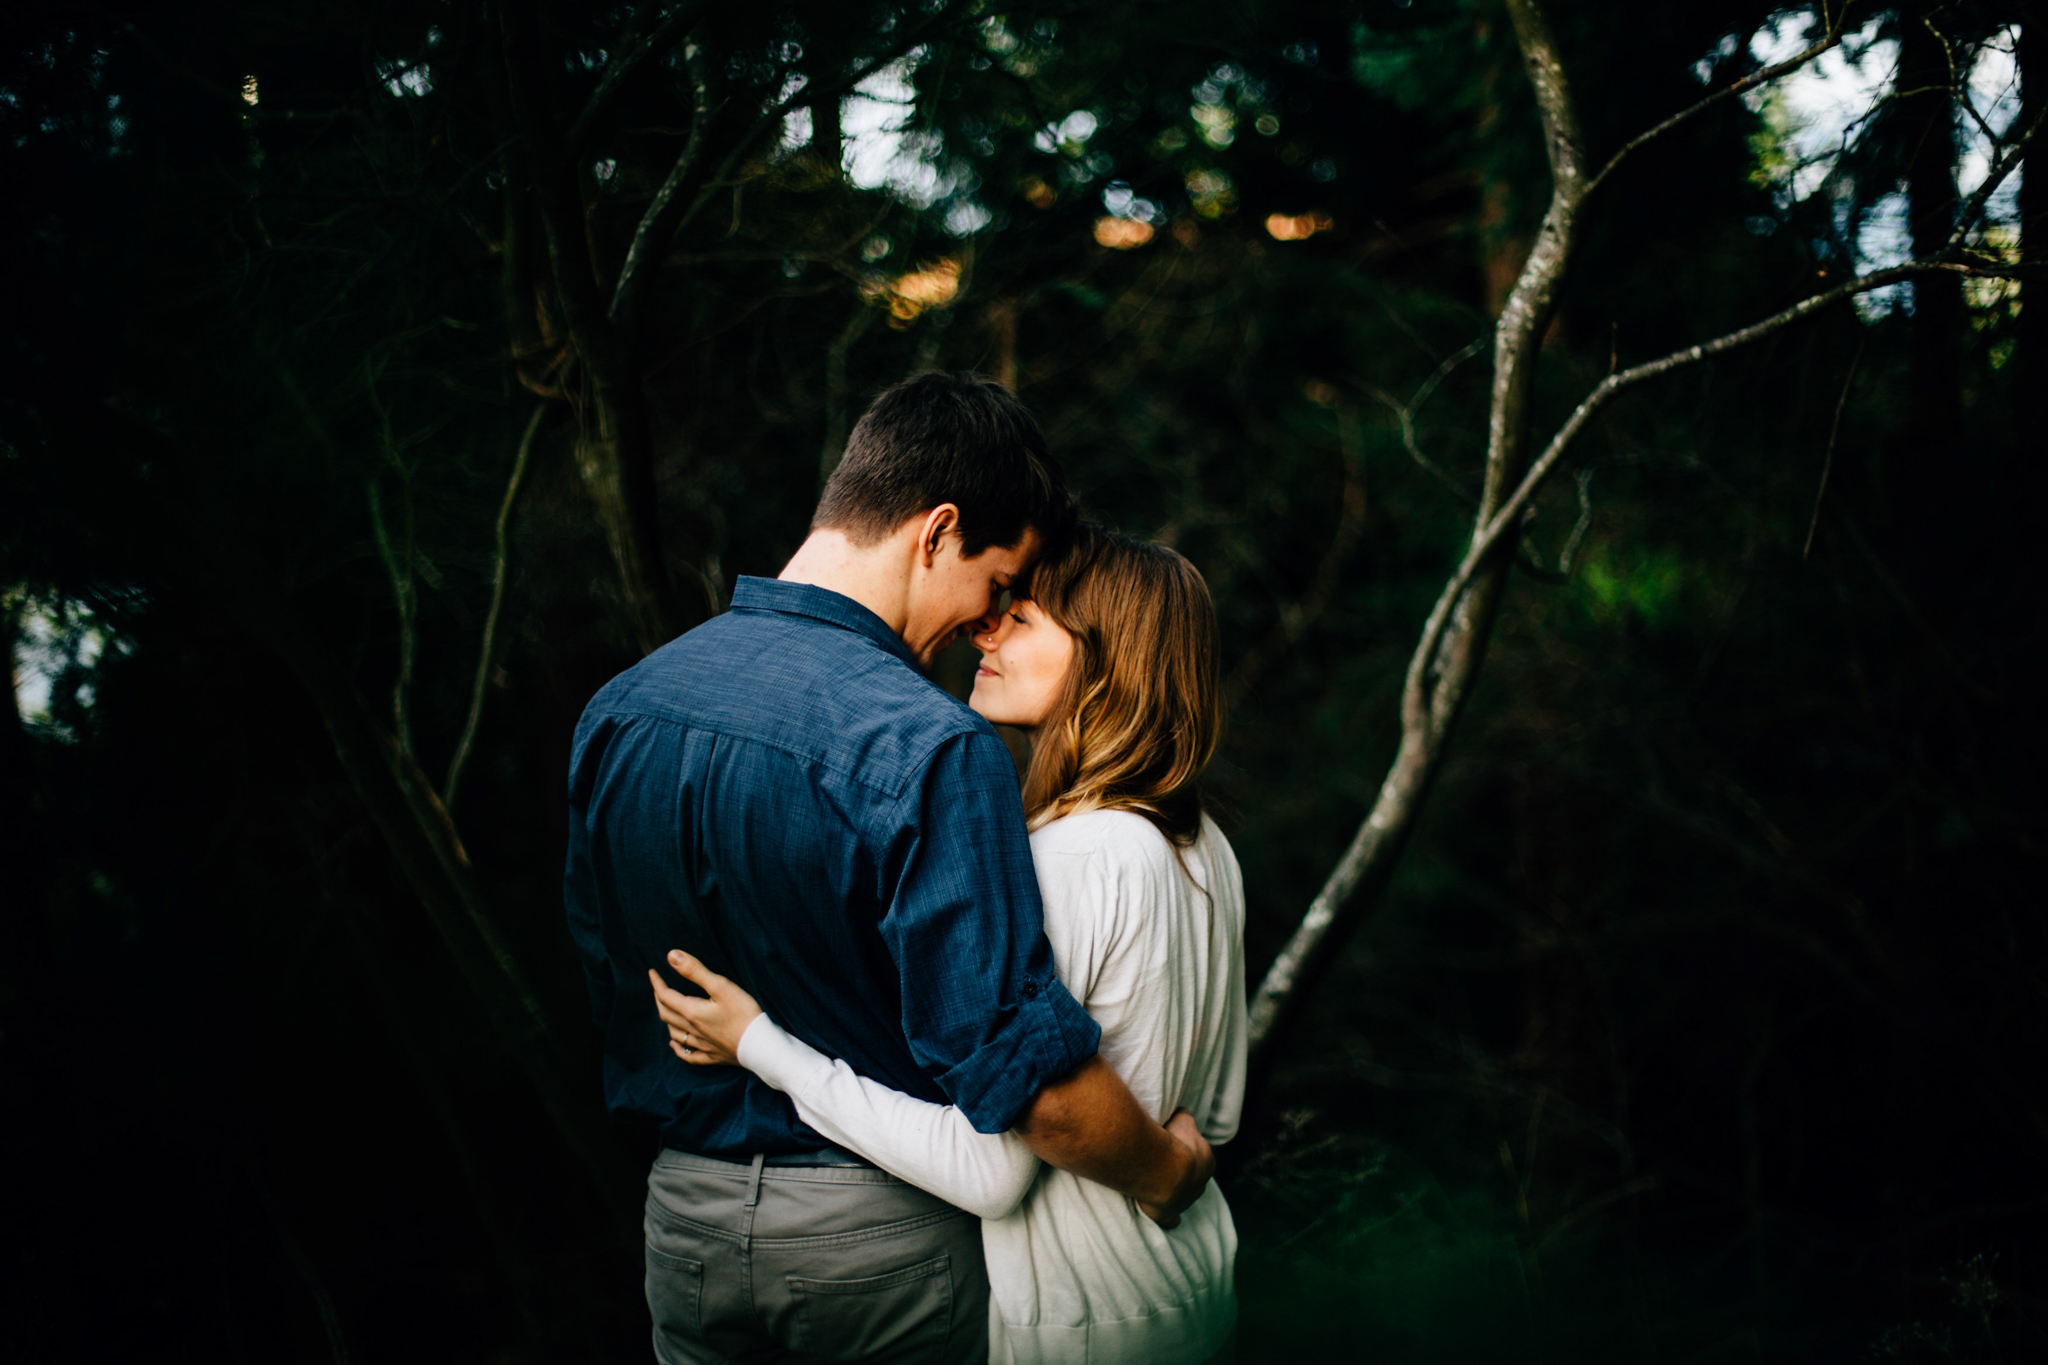 Vancouver Whytecliff Park Engagement Photographer - Emmy Lou Virginia Photography-3.jpg